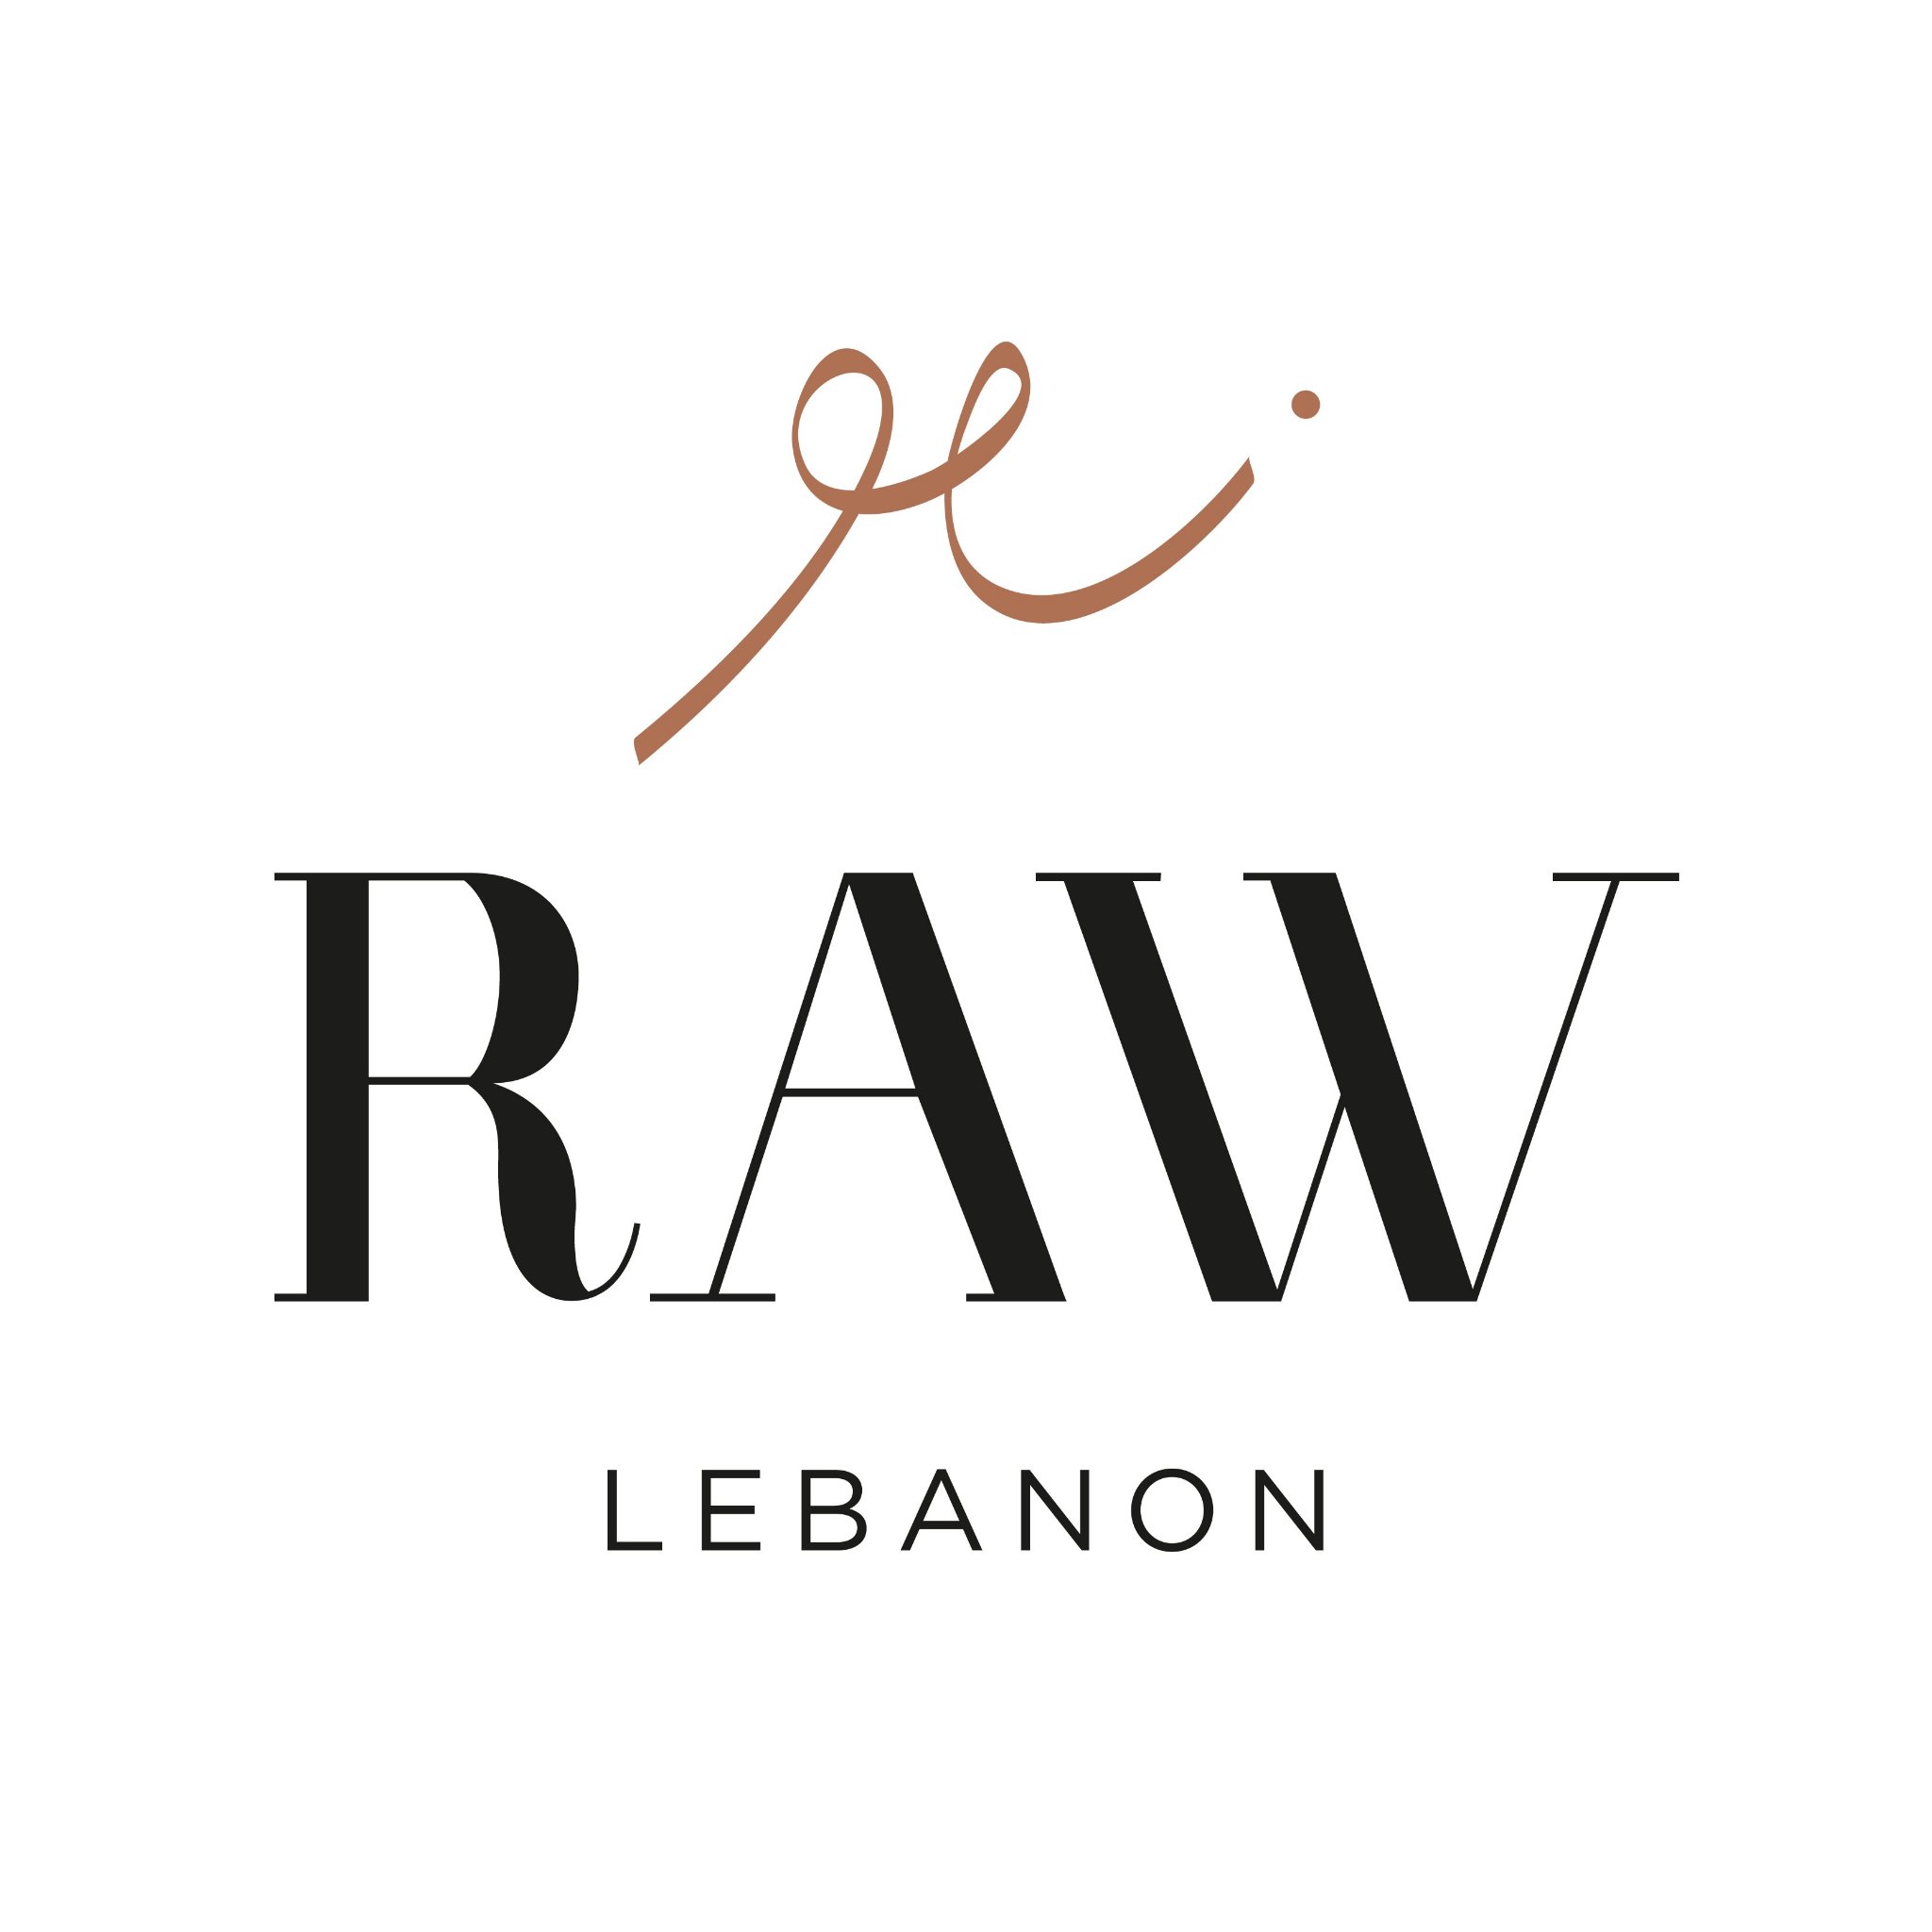 RAW is a new, premium range of naturally pure artisanal #honey from the mountains of #Lebanon.